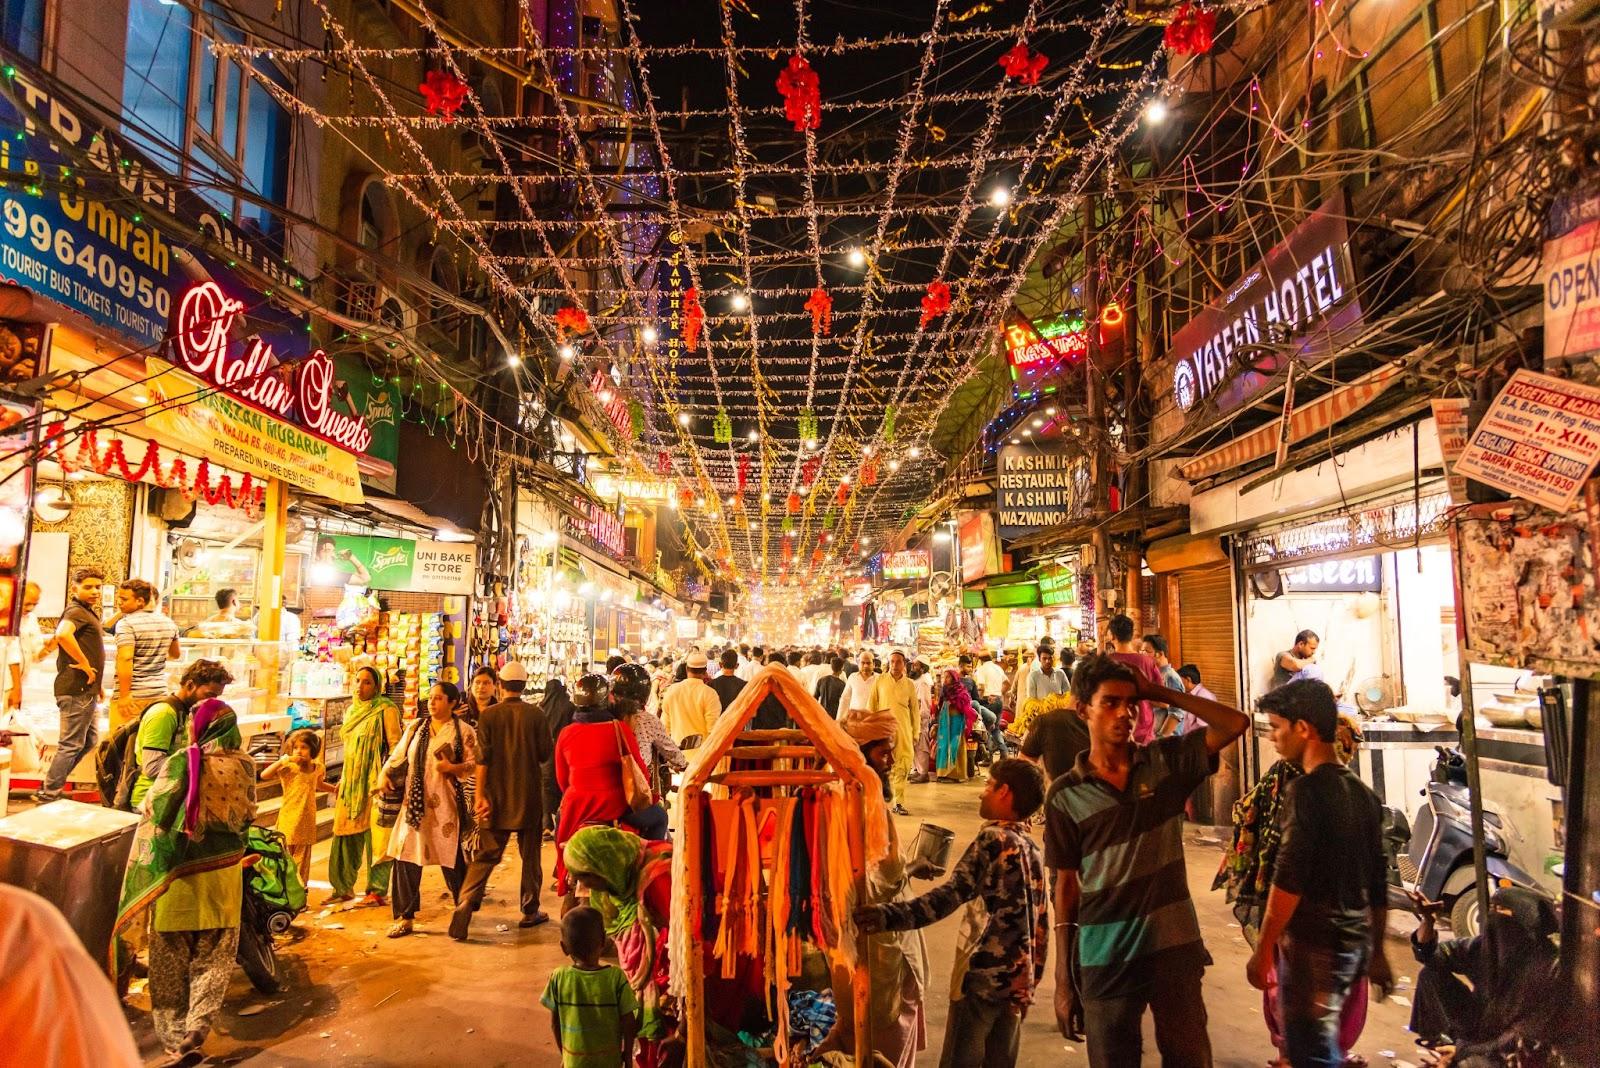 People in Urdu Bazar or market street of historical part of Chandni Chowk locality of Old Delhi in the evening.